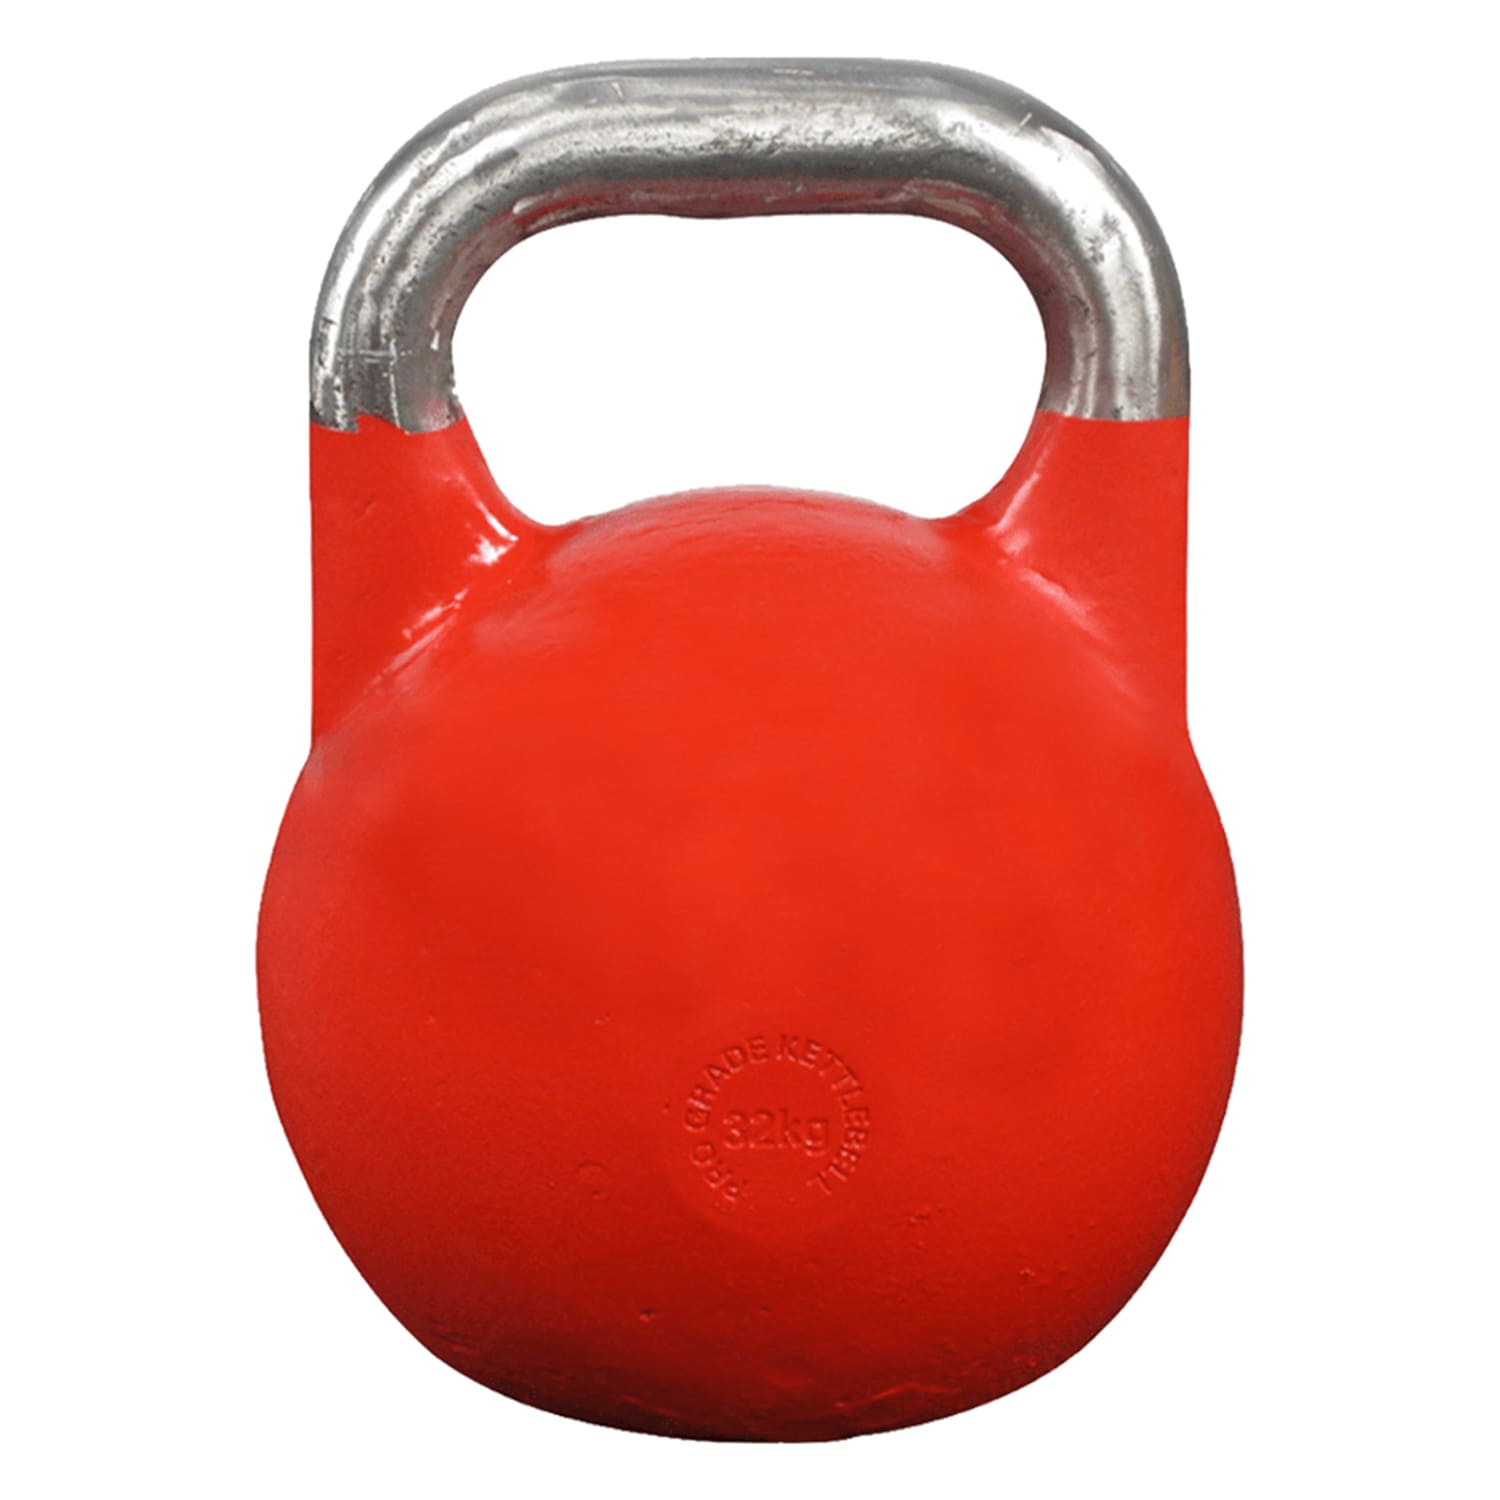 Force USA Pro Grade Competition Kettlebell, 32 Kg